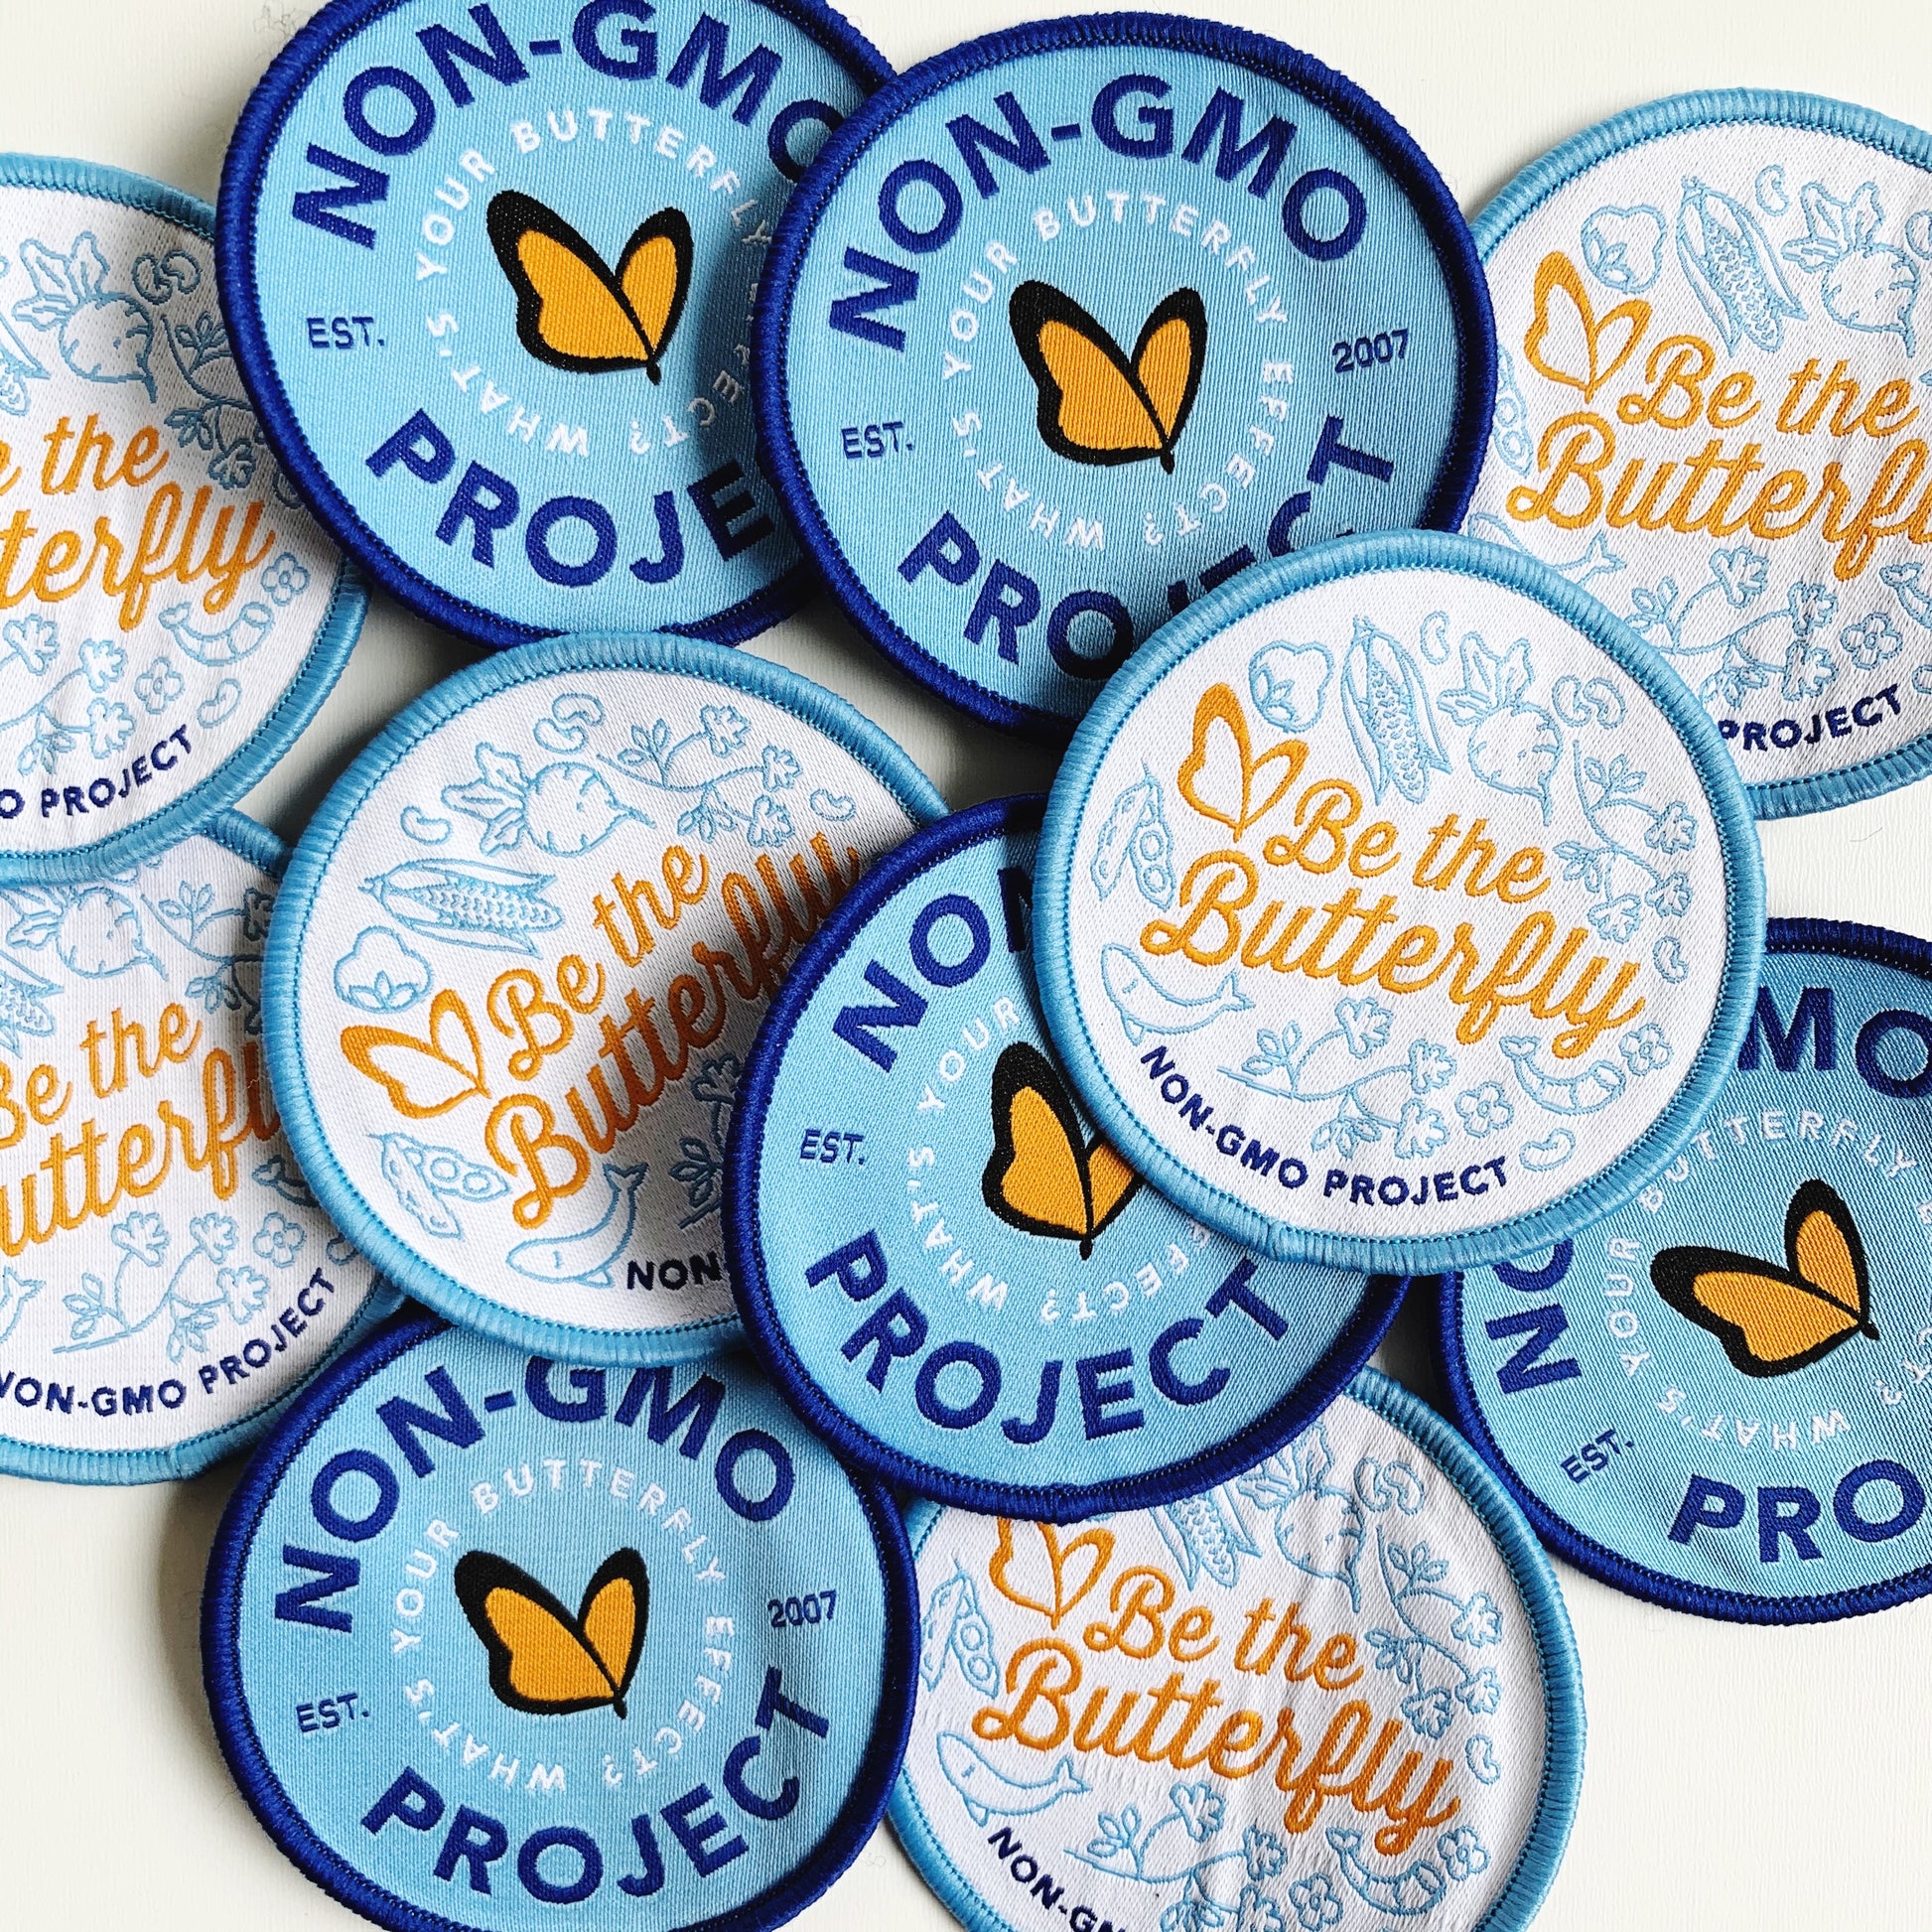 Pile of Non-GMO Project patches